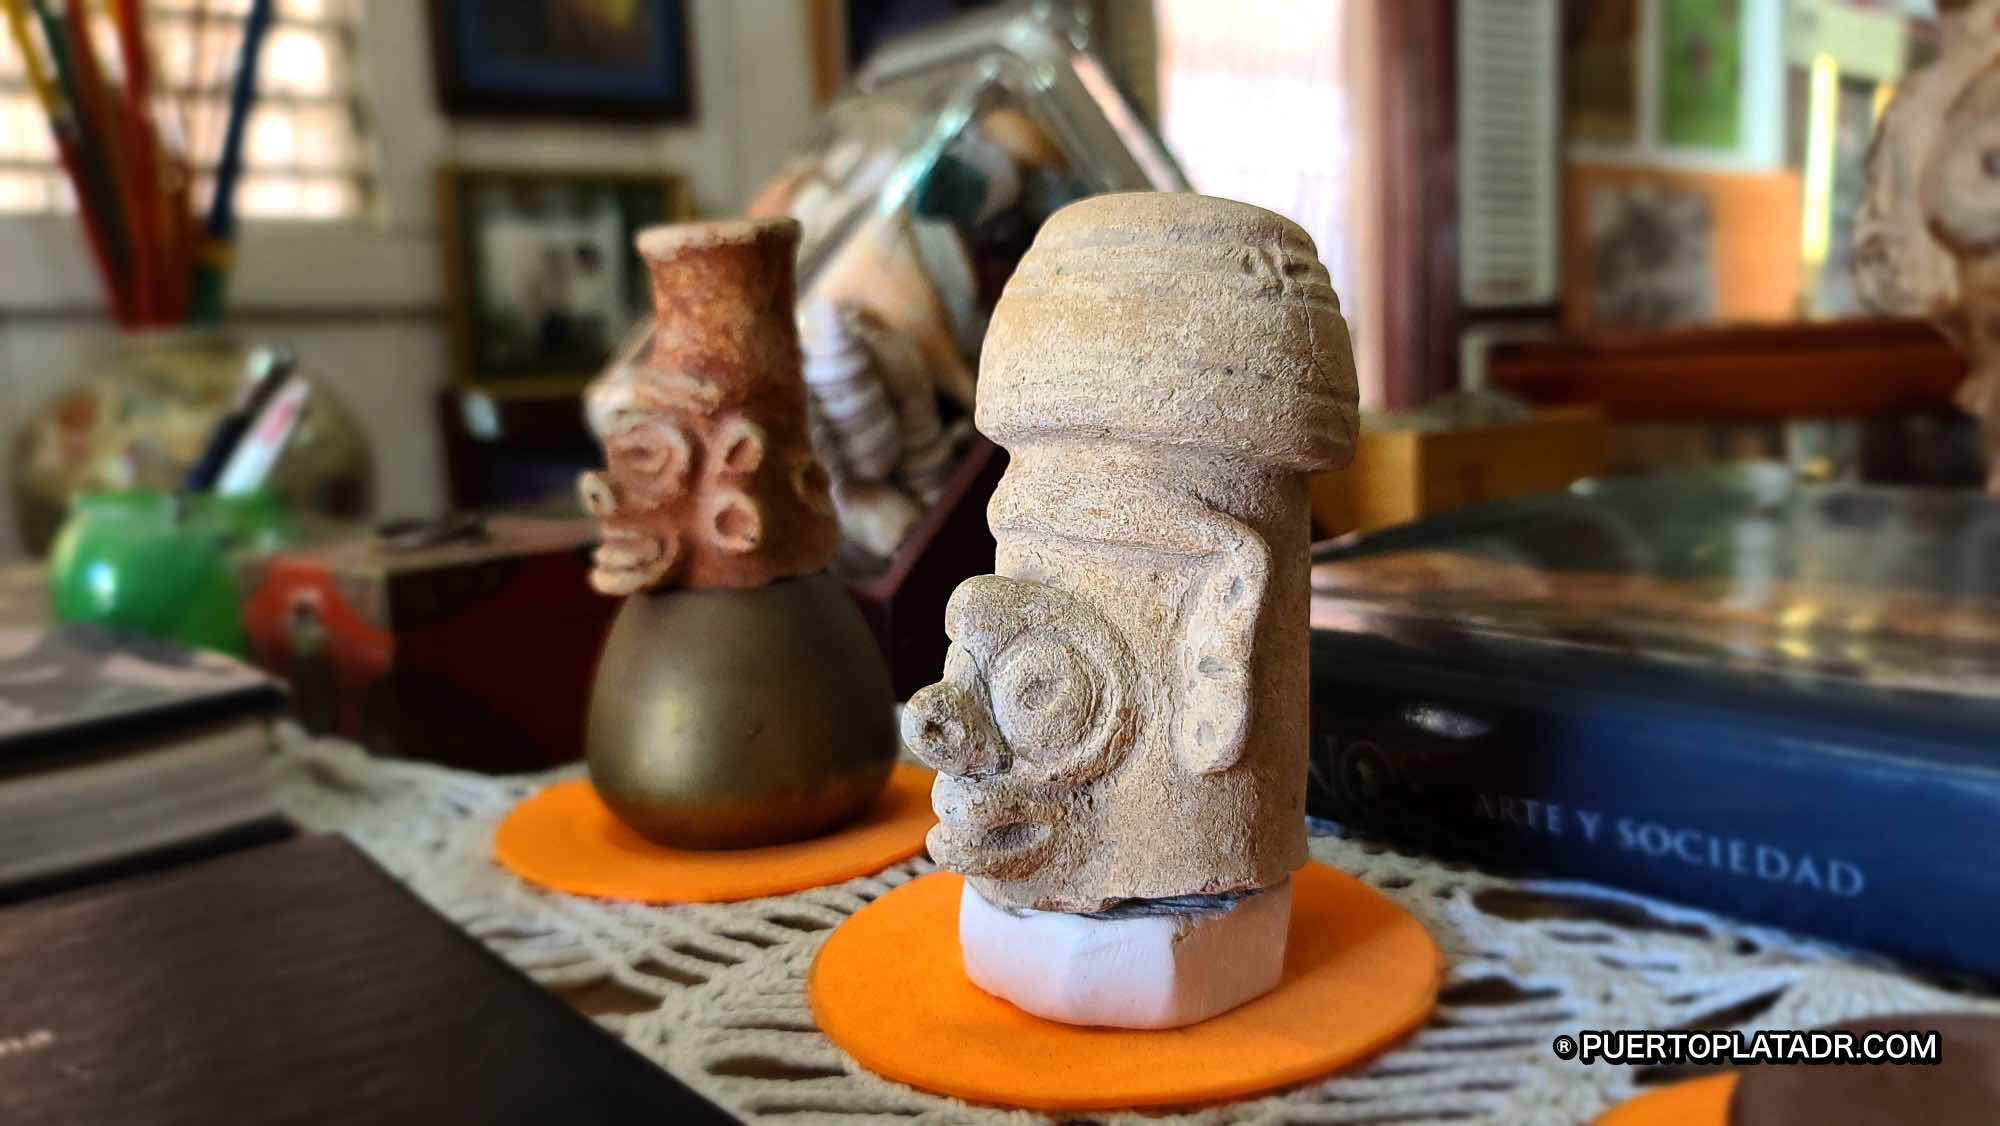 pieces in the Taino Museum of Puerto Plata.